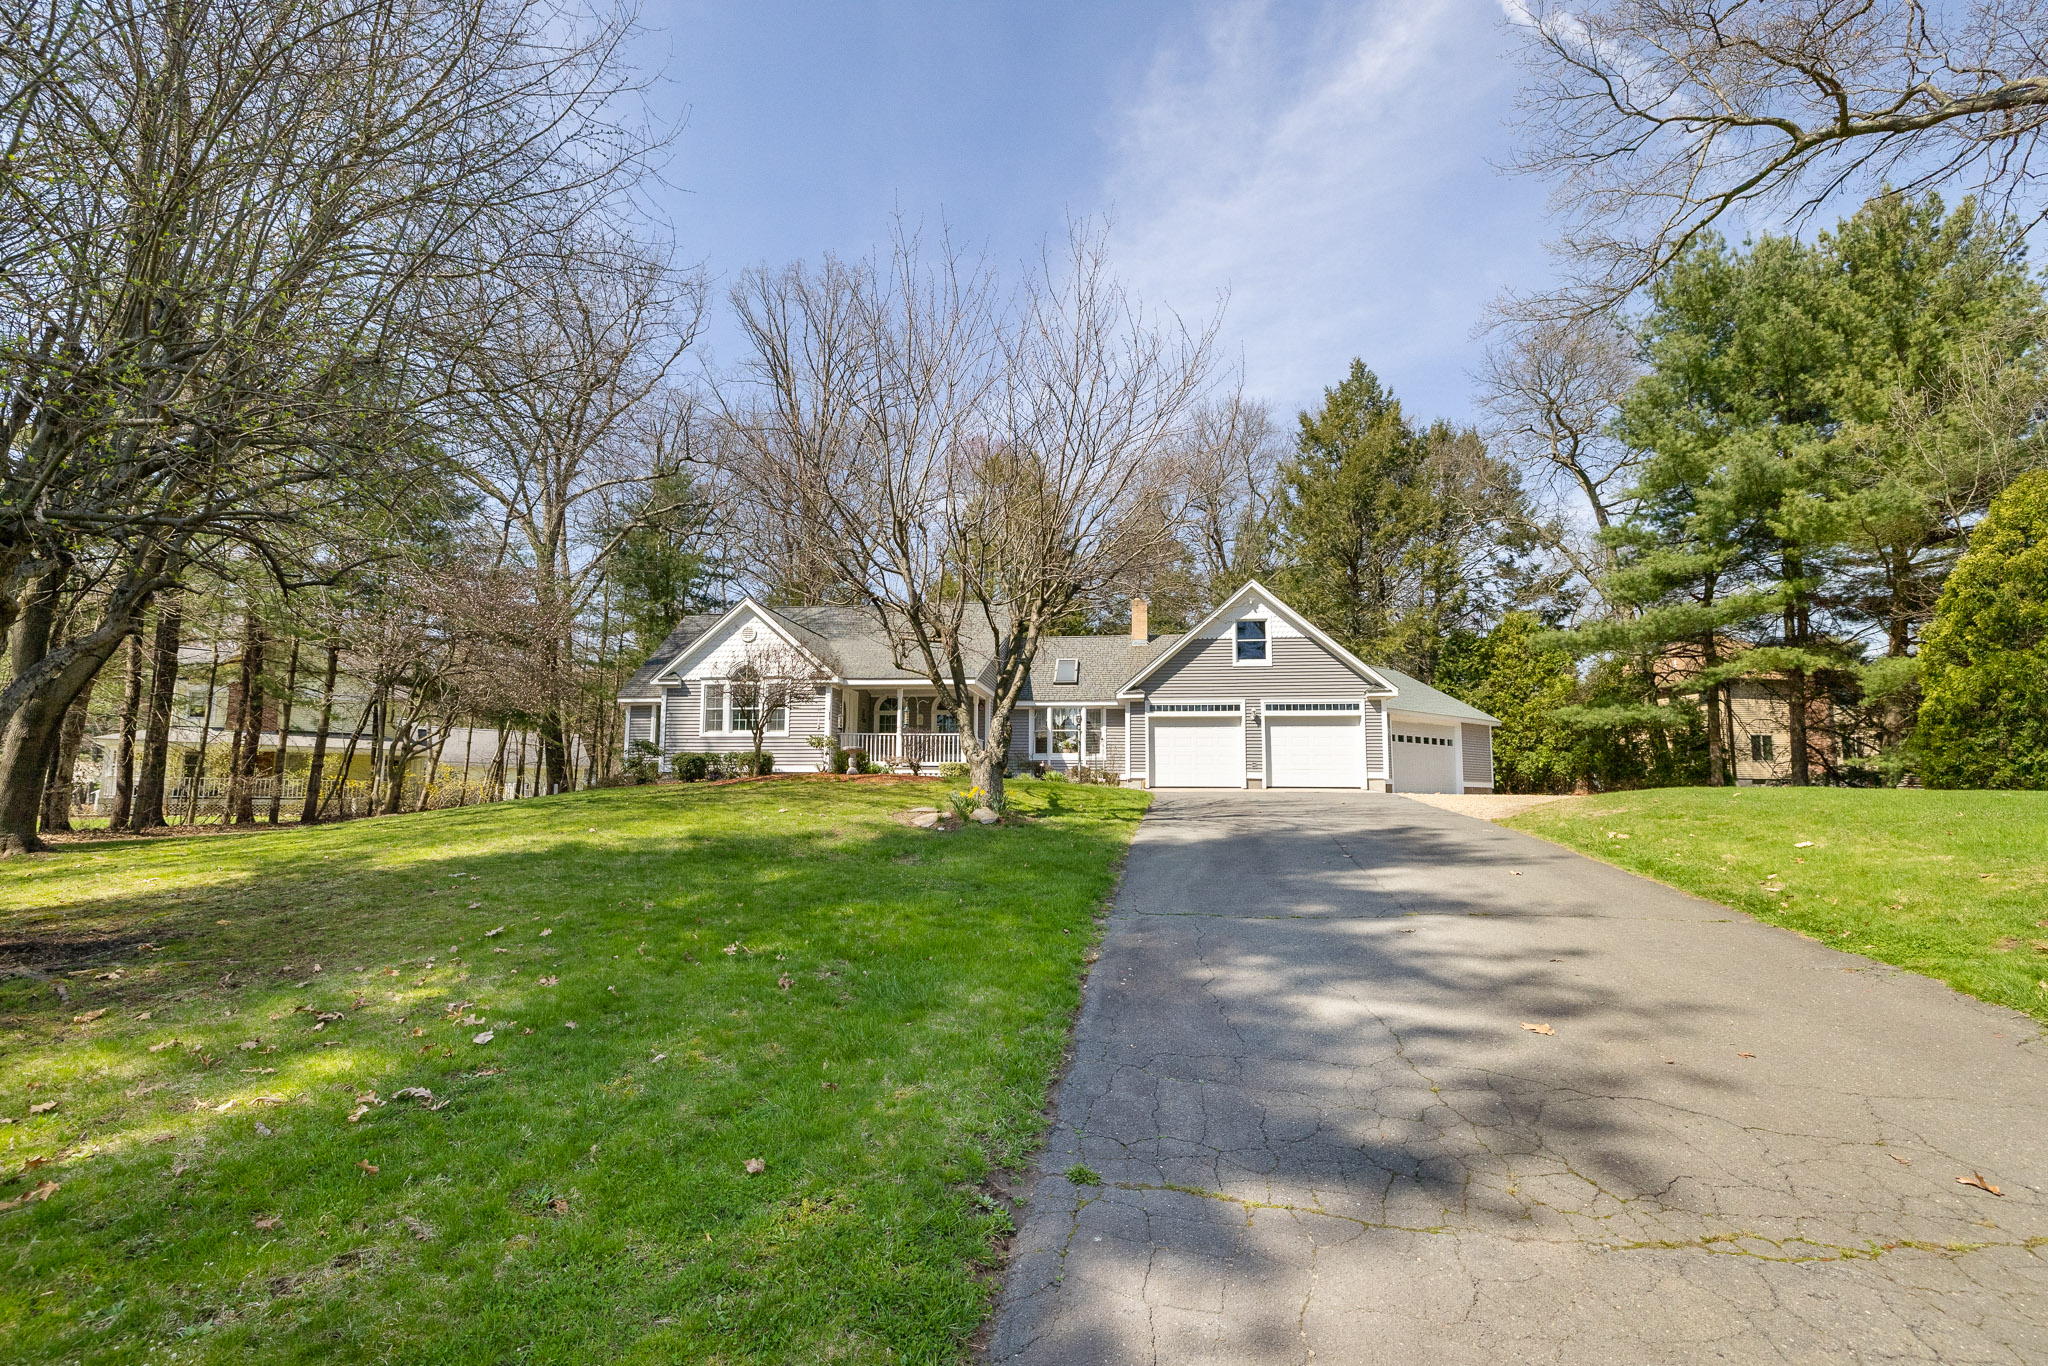 75 Wrights Brook Dr, Somers, CT 06071, USA